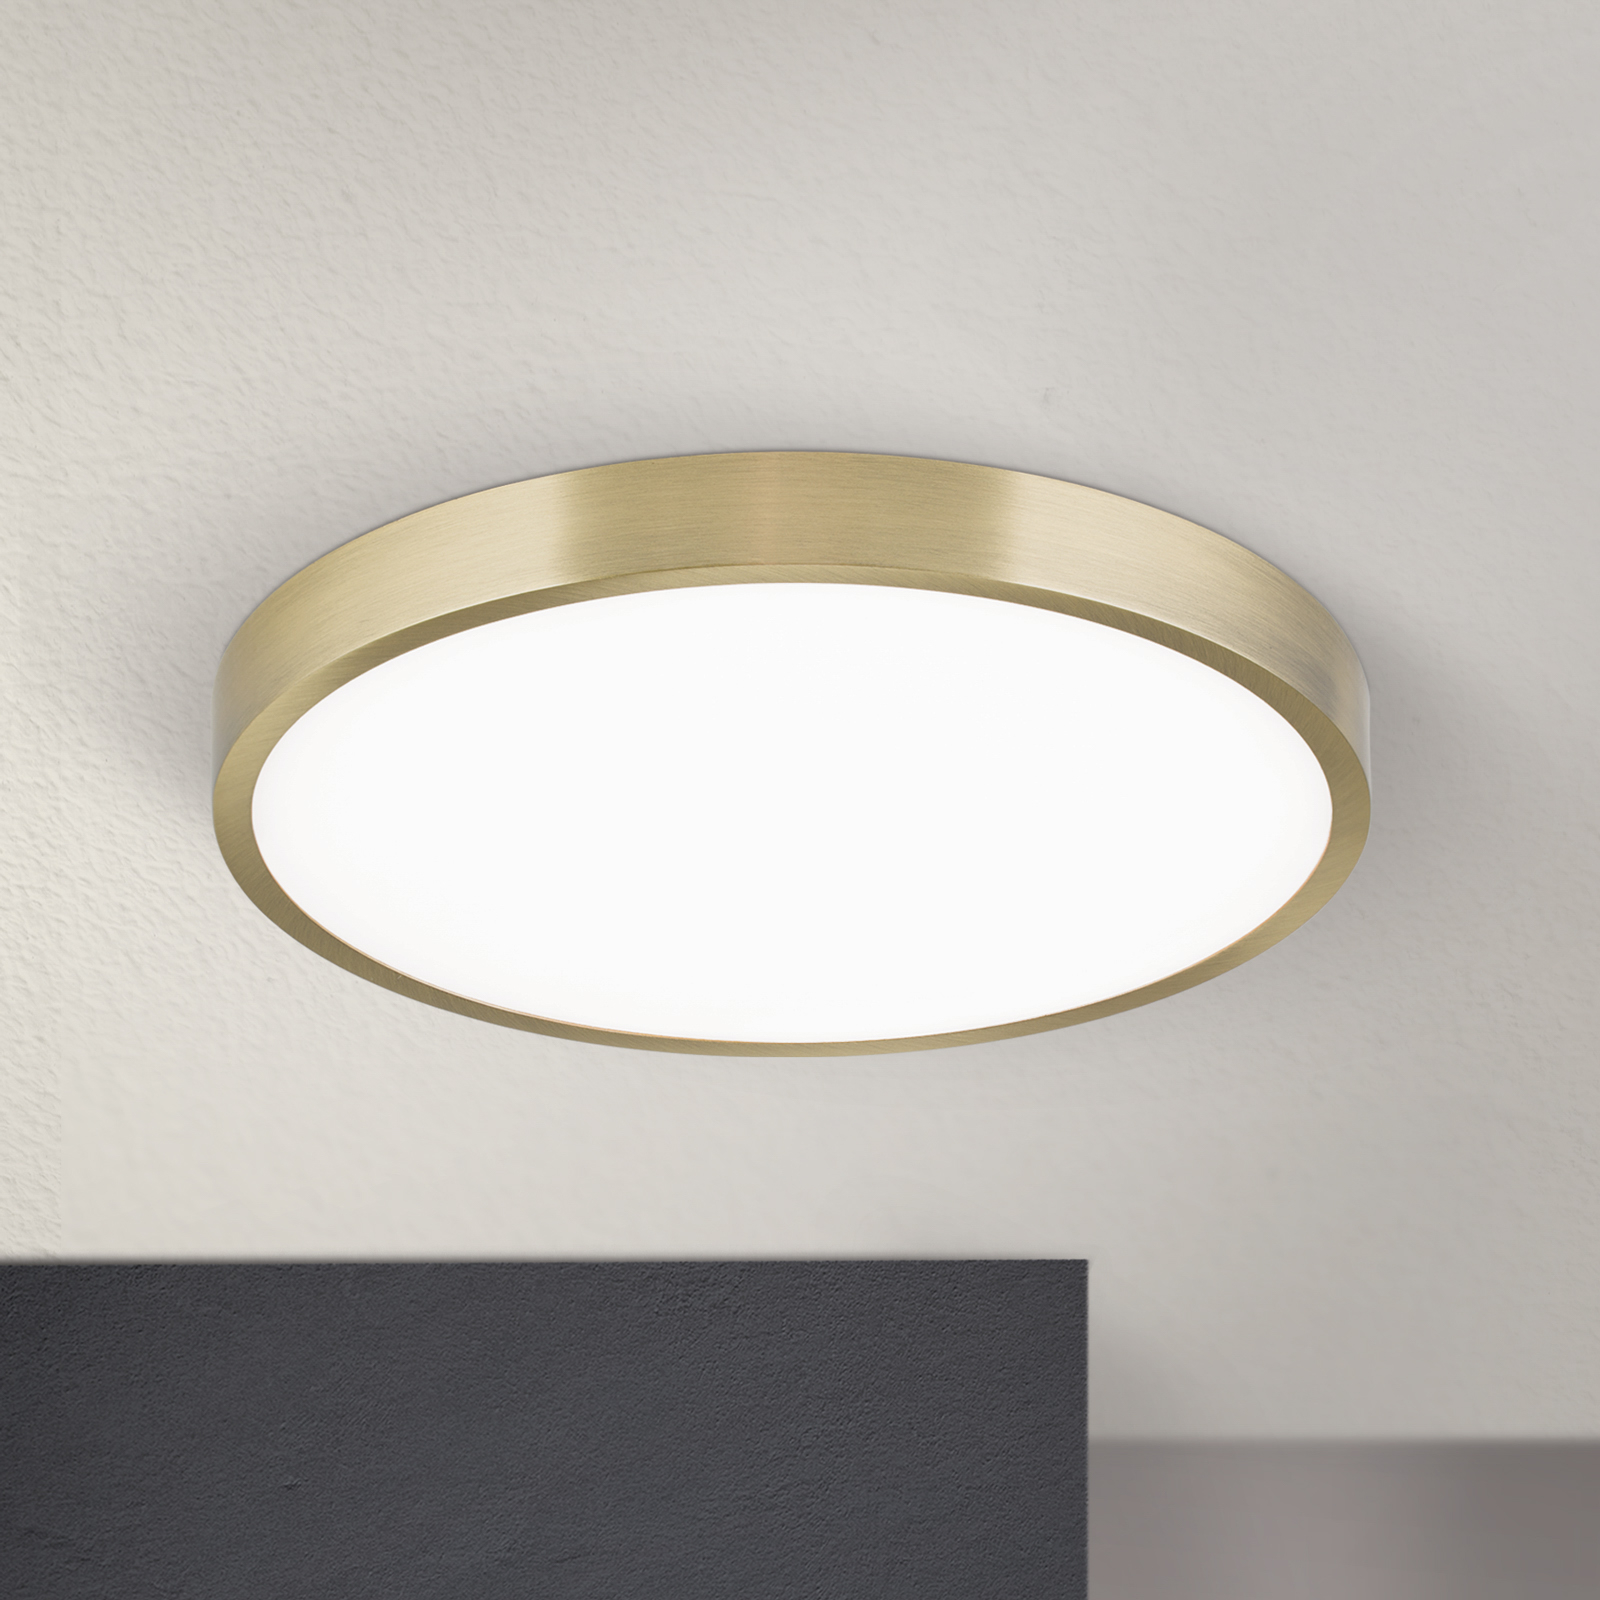 Bully LED ceiling light with a patina look, 28 cm